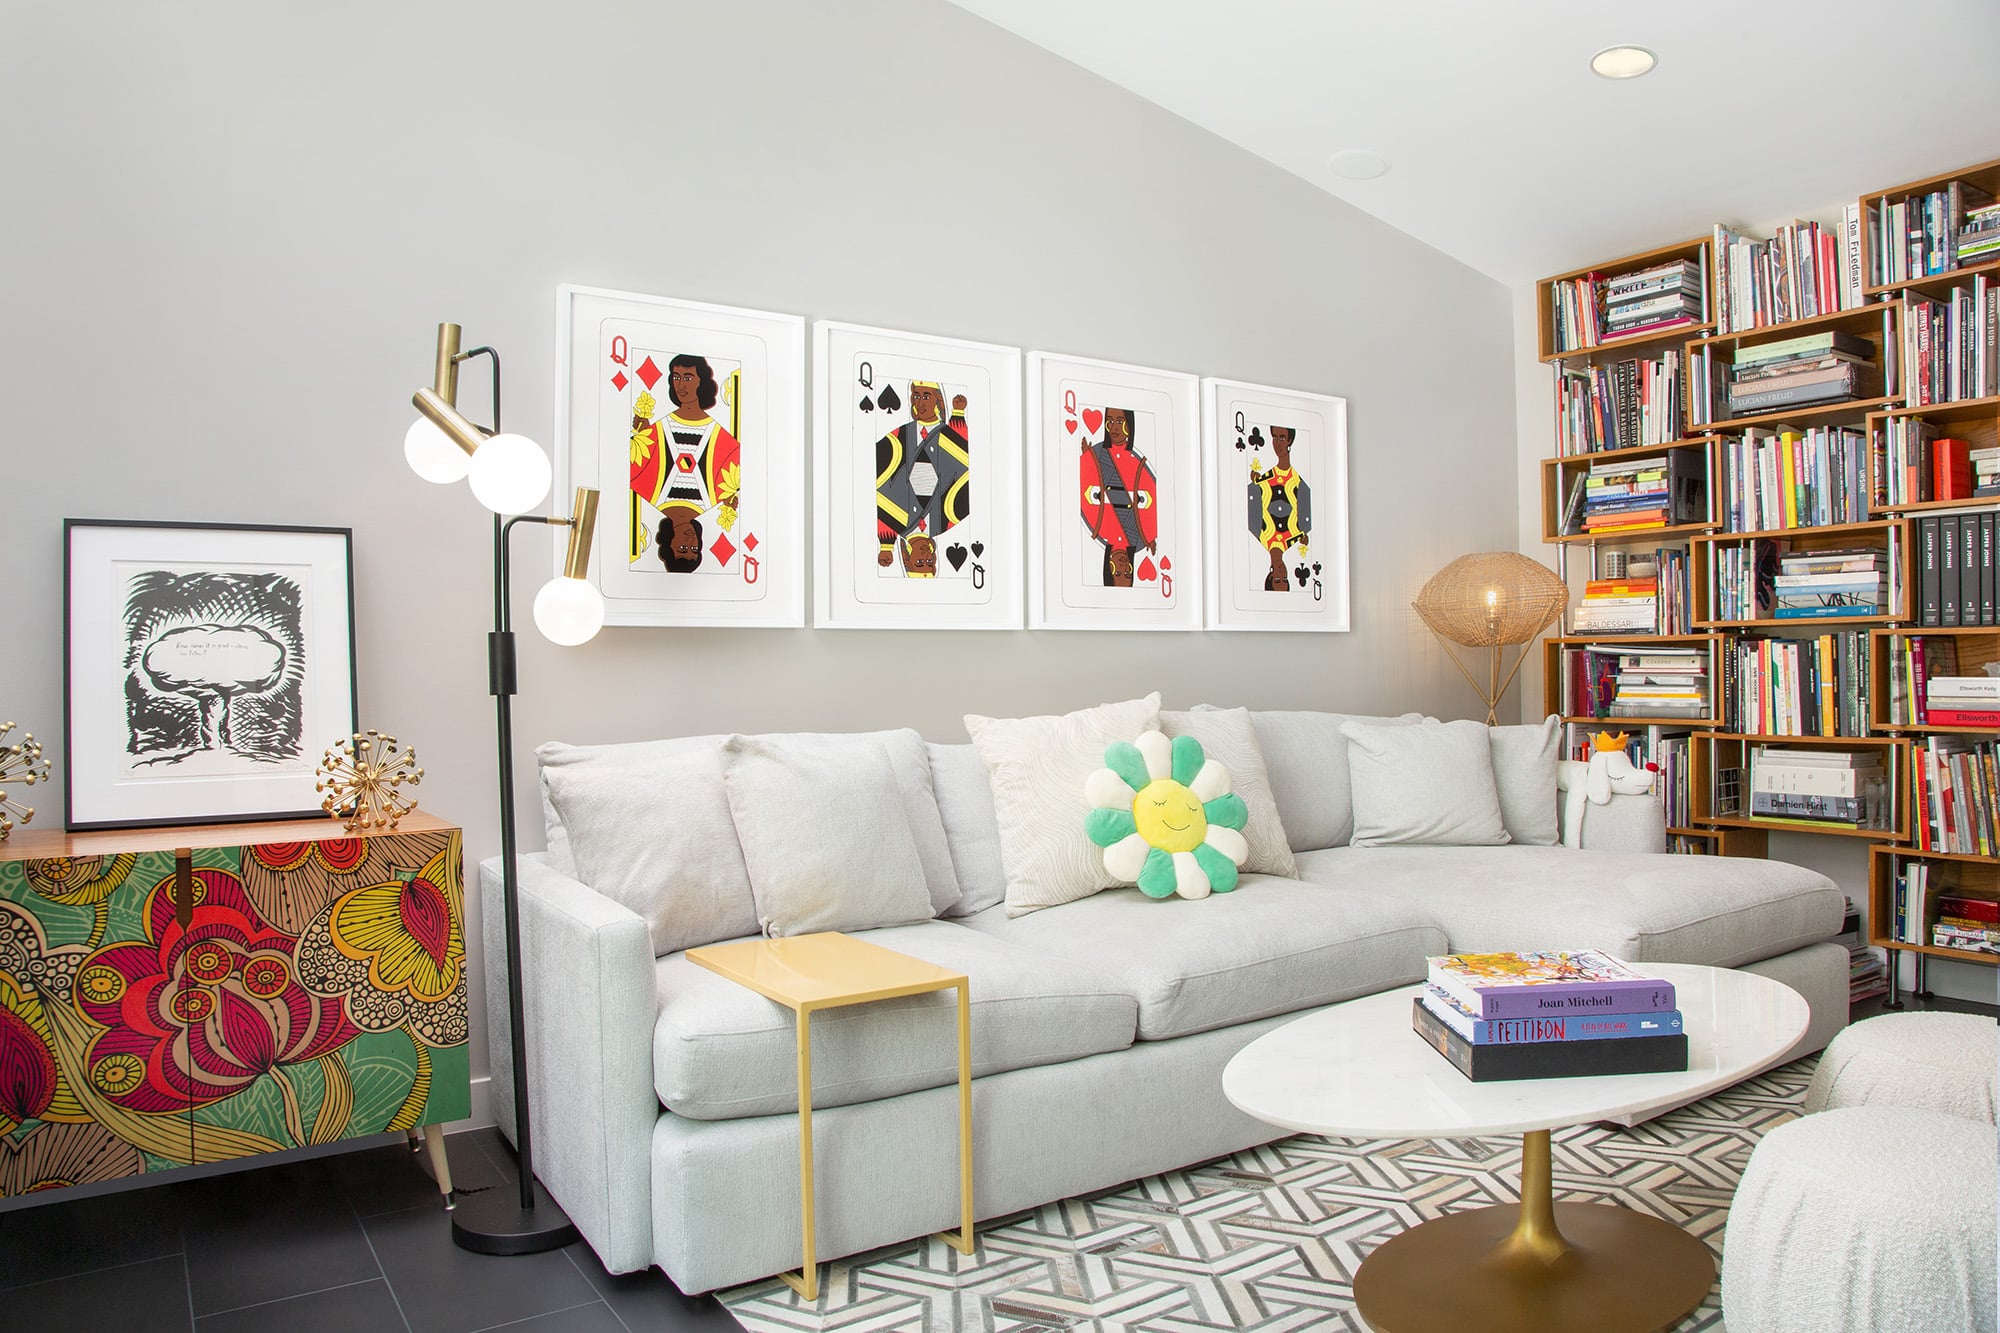 Art in a Home, photographed by Square Shooting